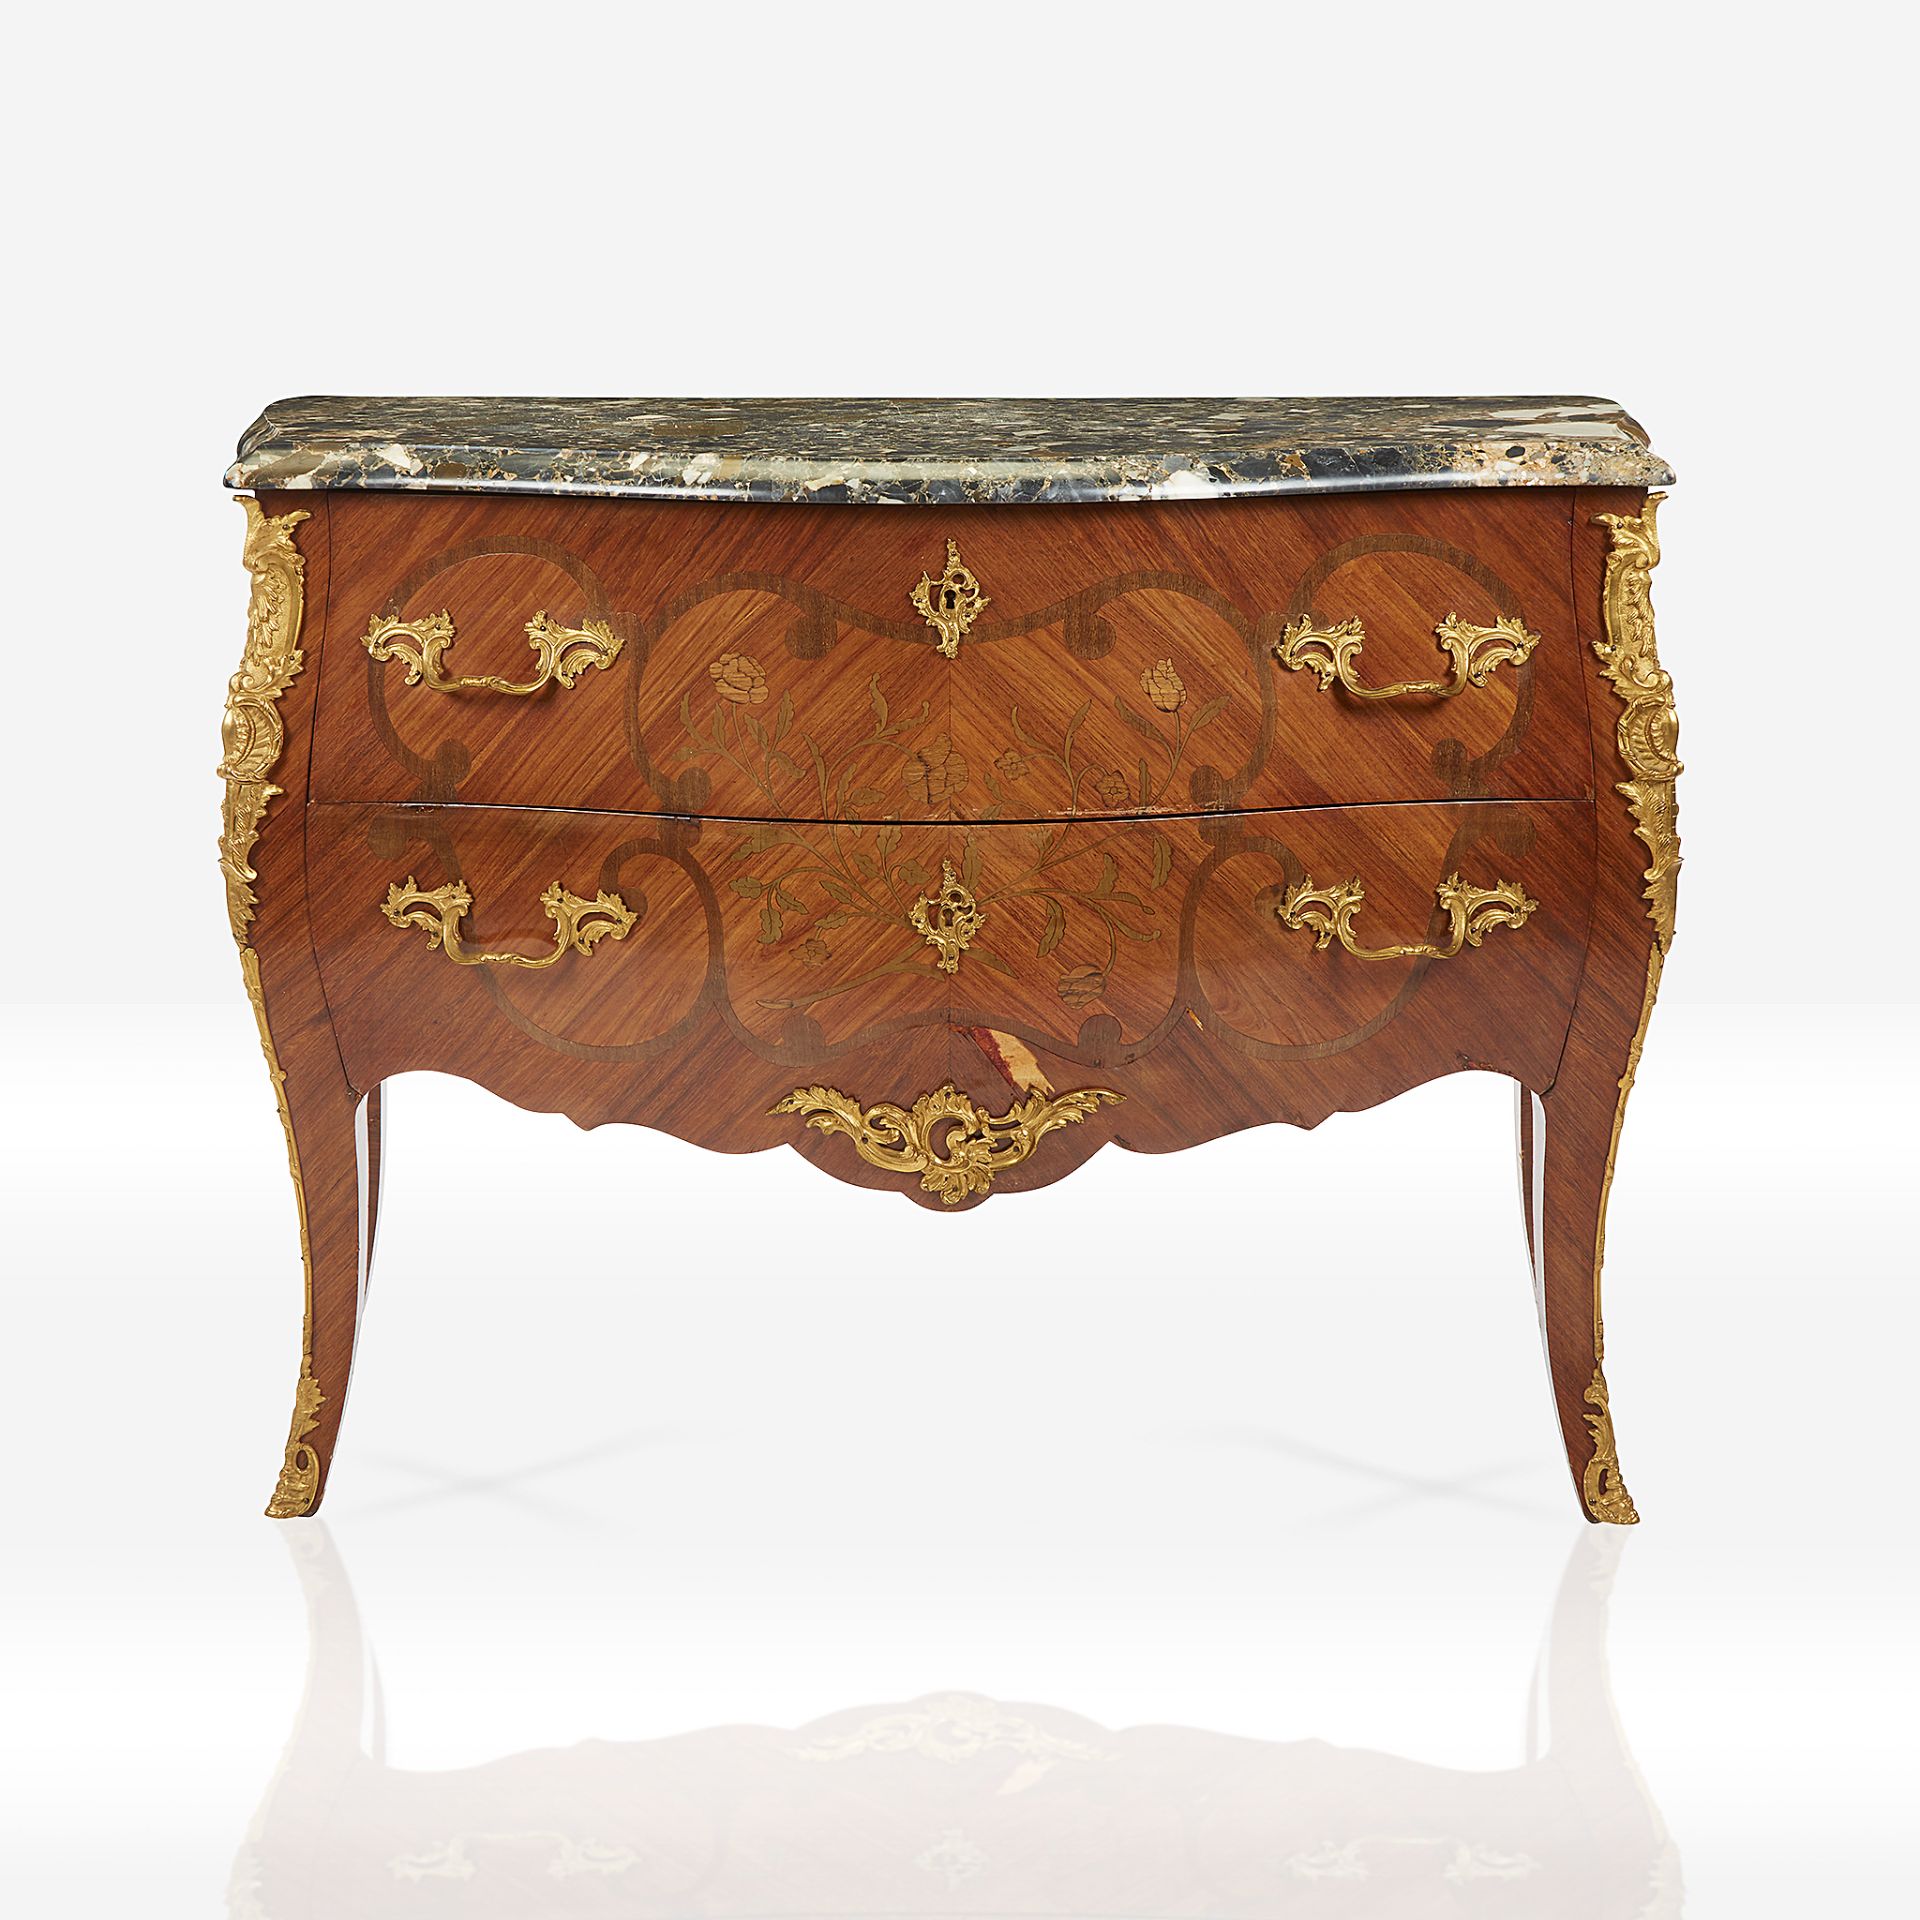 A Louis XV style gilt-metal mounted fruitwood marquetry and kingwood parquetry bombé commode with ma